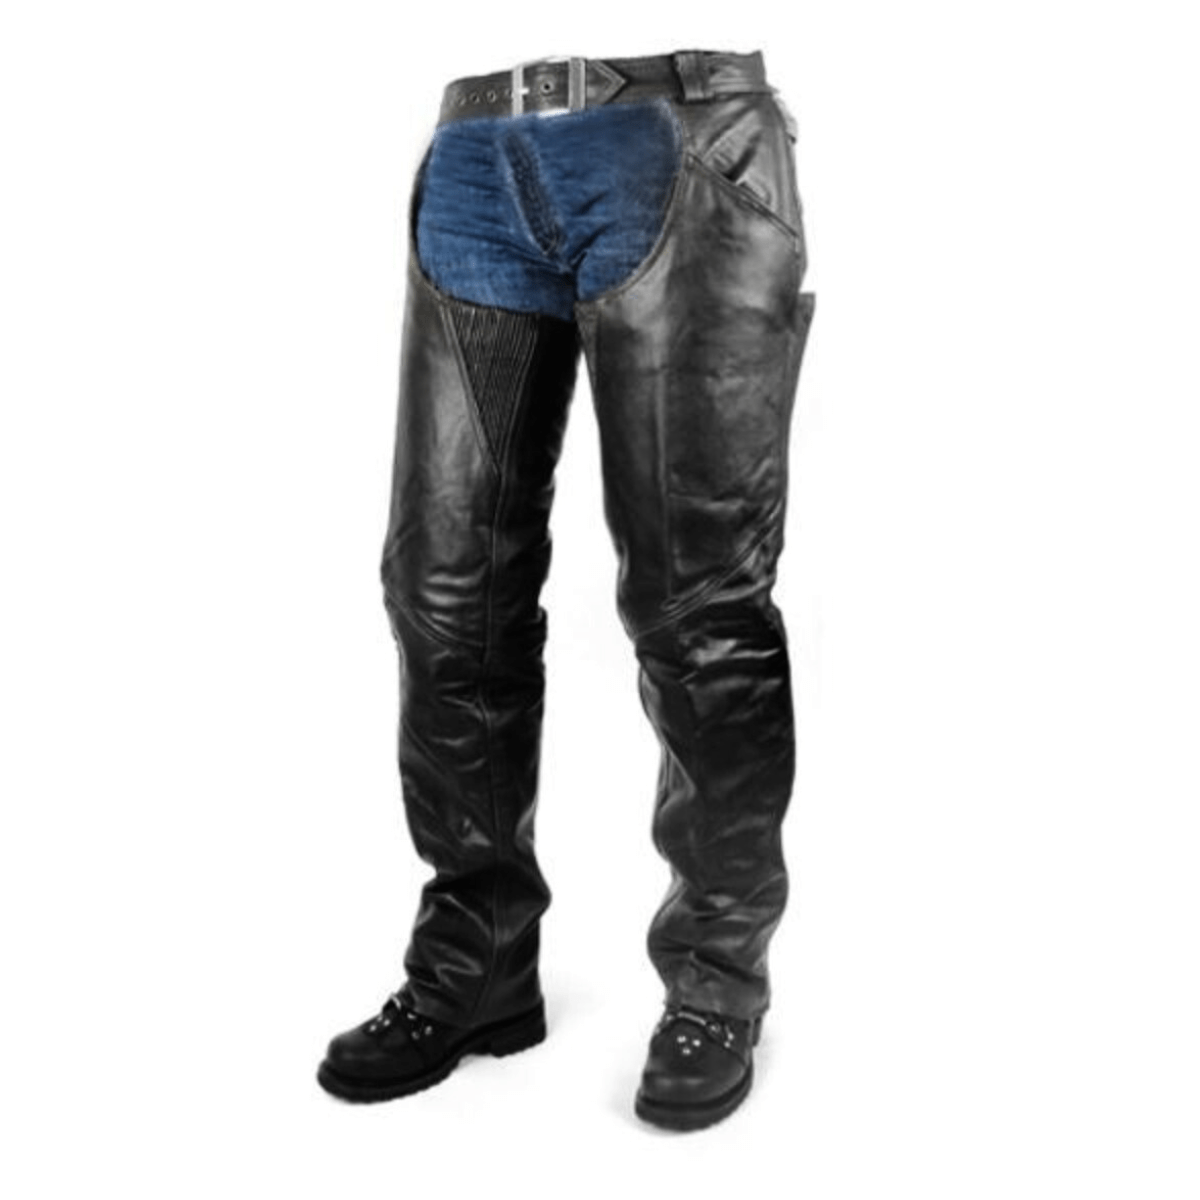 Vance Zip-Out Insulation Pant Style Motorcycle Leather Chaps